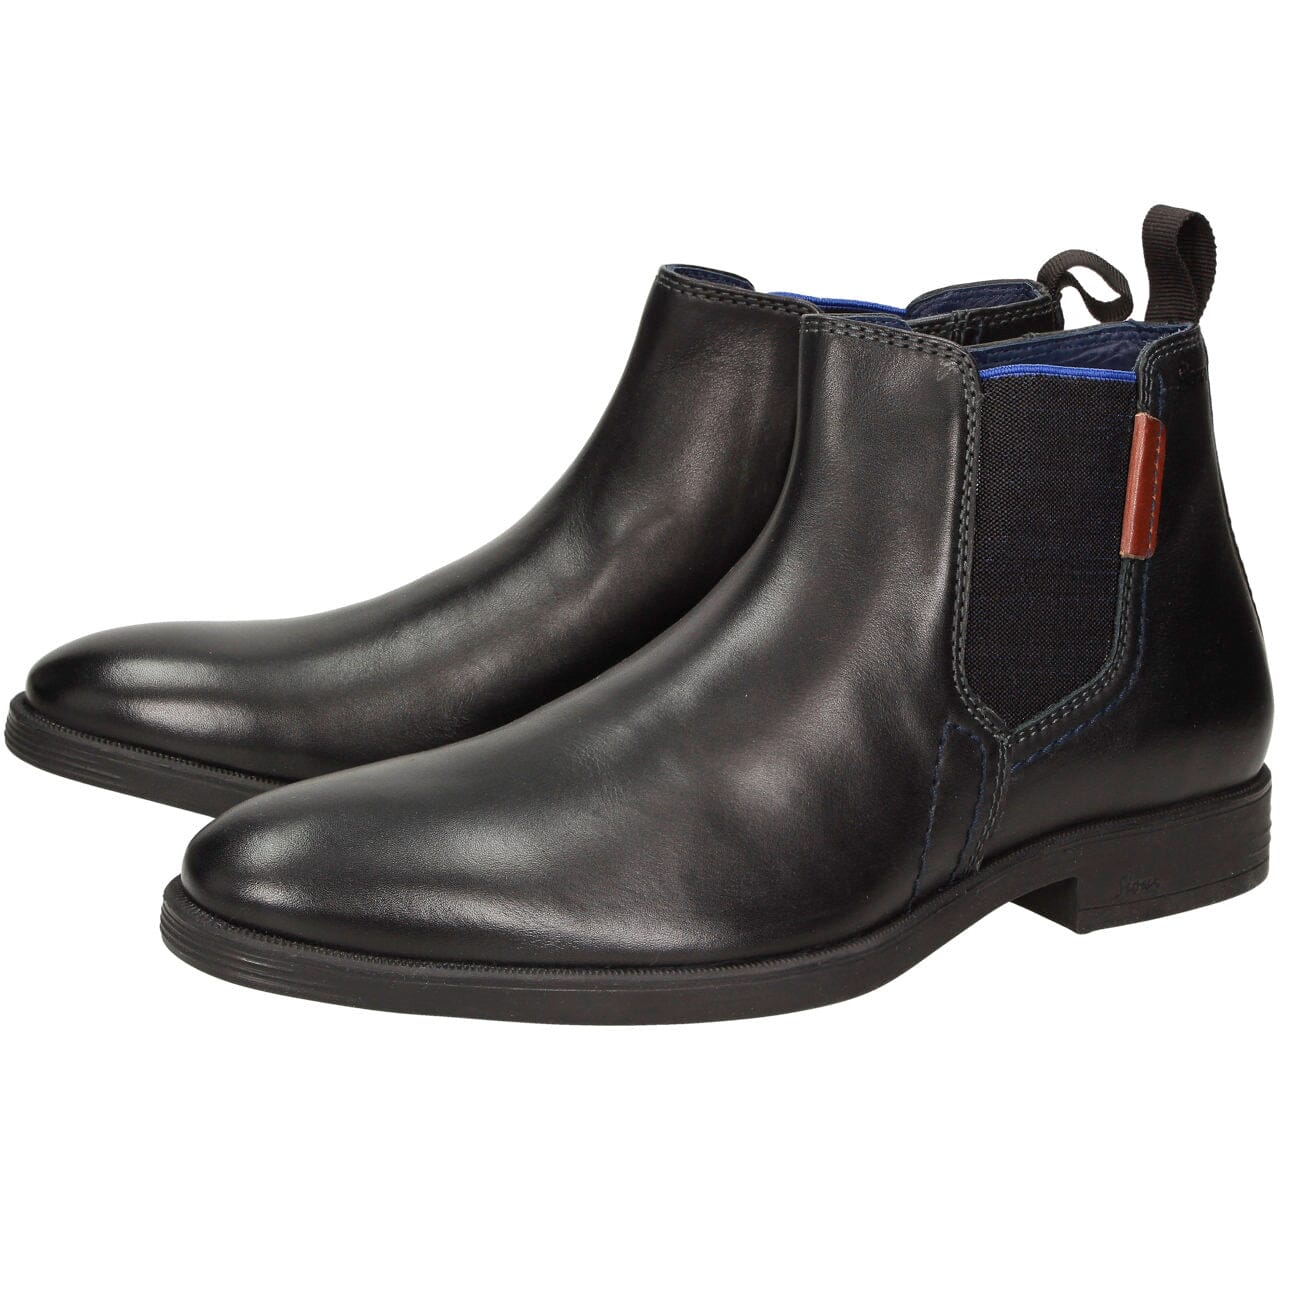 Sioux, FORIOLO, Boot, Leather, Schwarz Boots Sioux Schwarz 40 